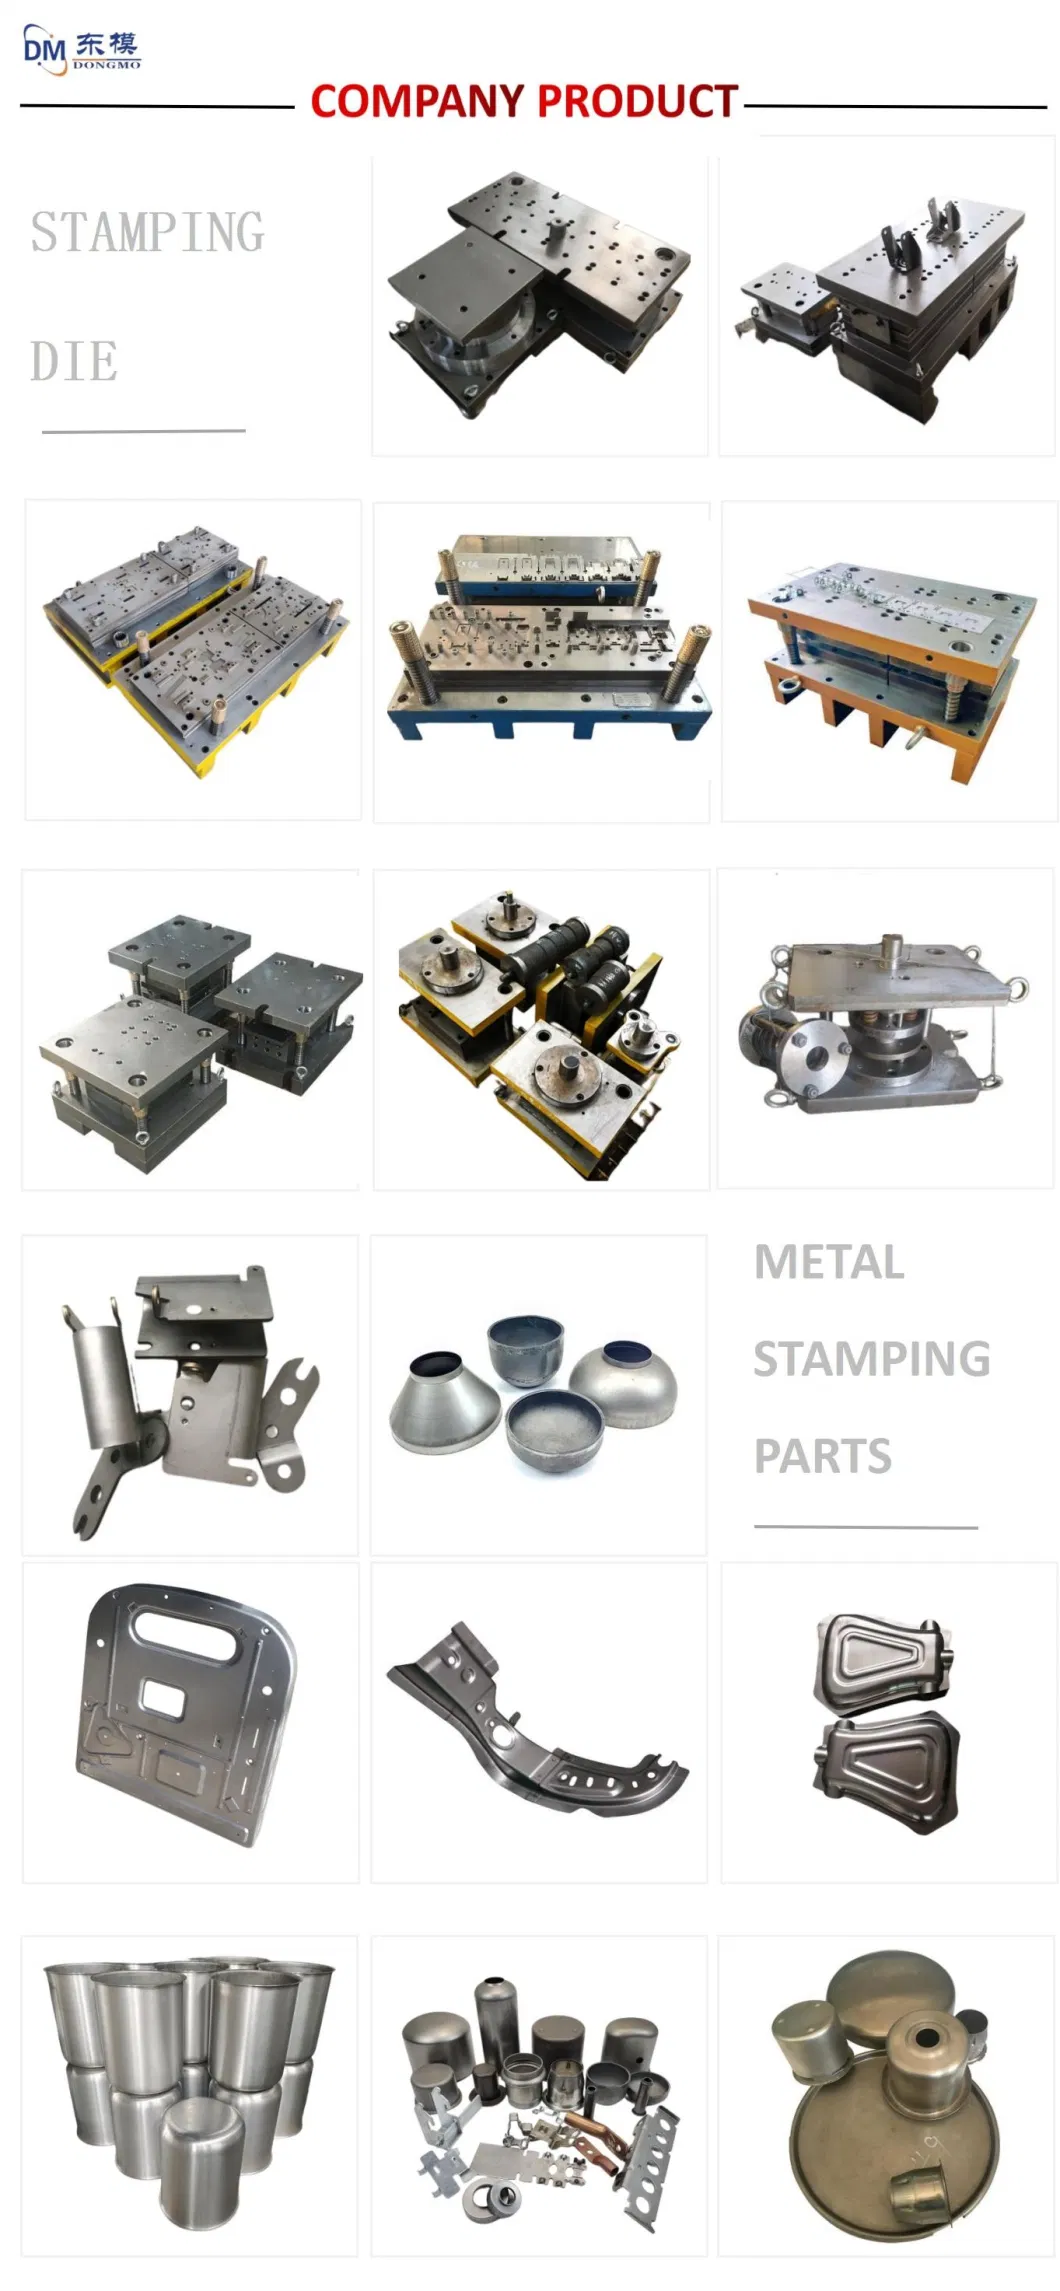 Non-Standard Precision Sheet Metal Stamping Parts/Special-Shaped Tensile Parts